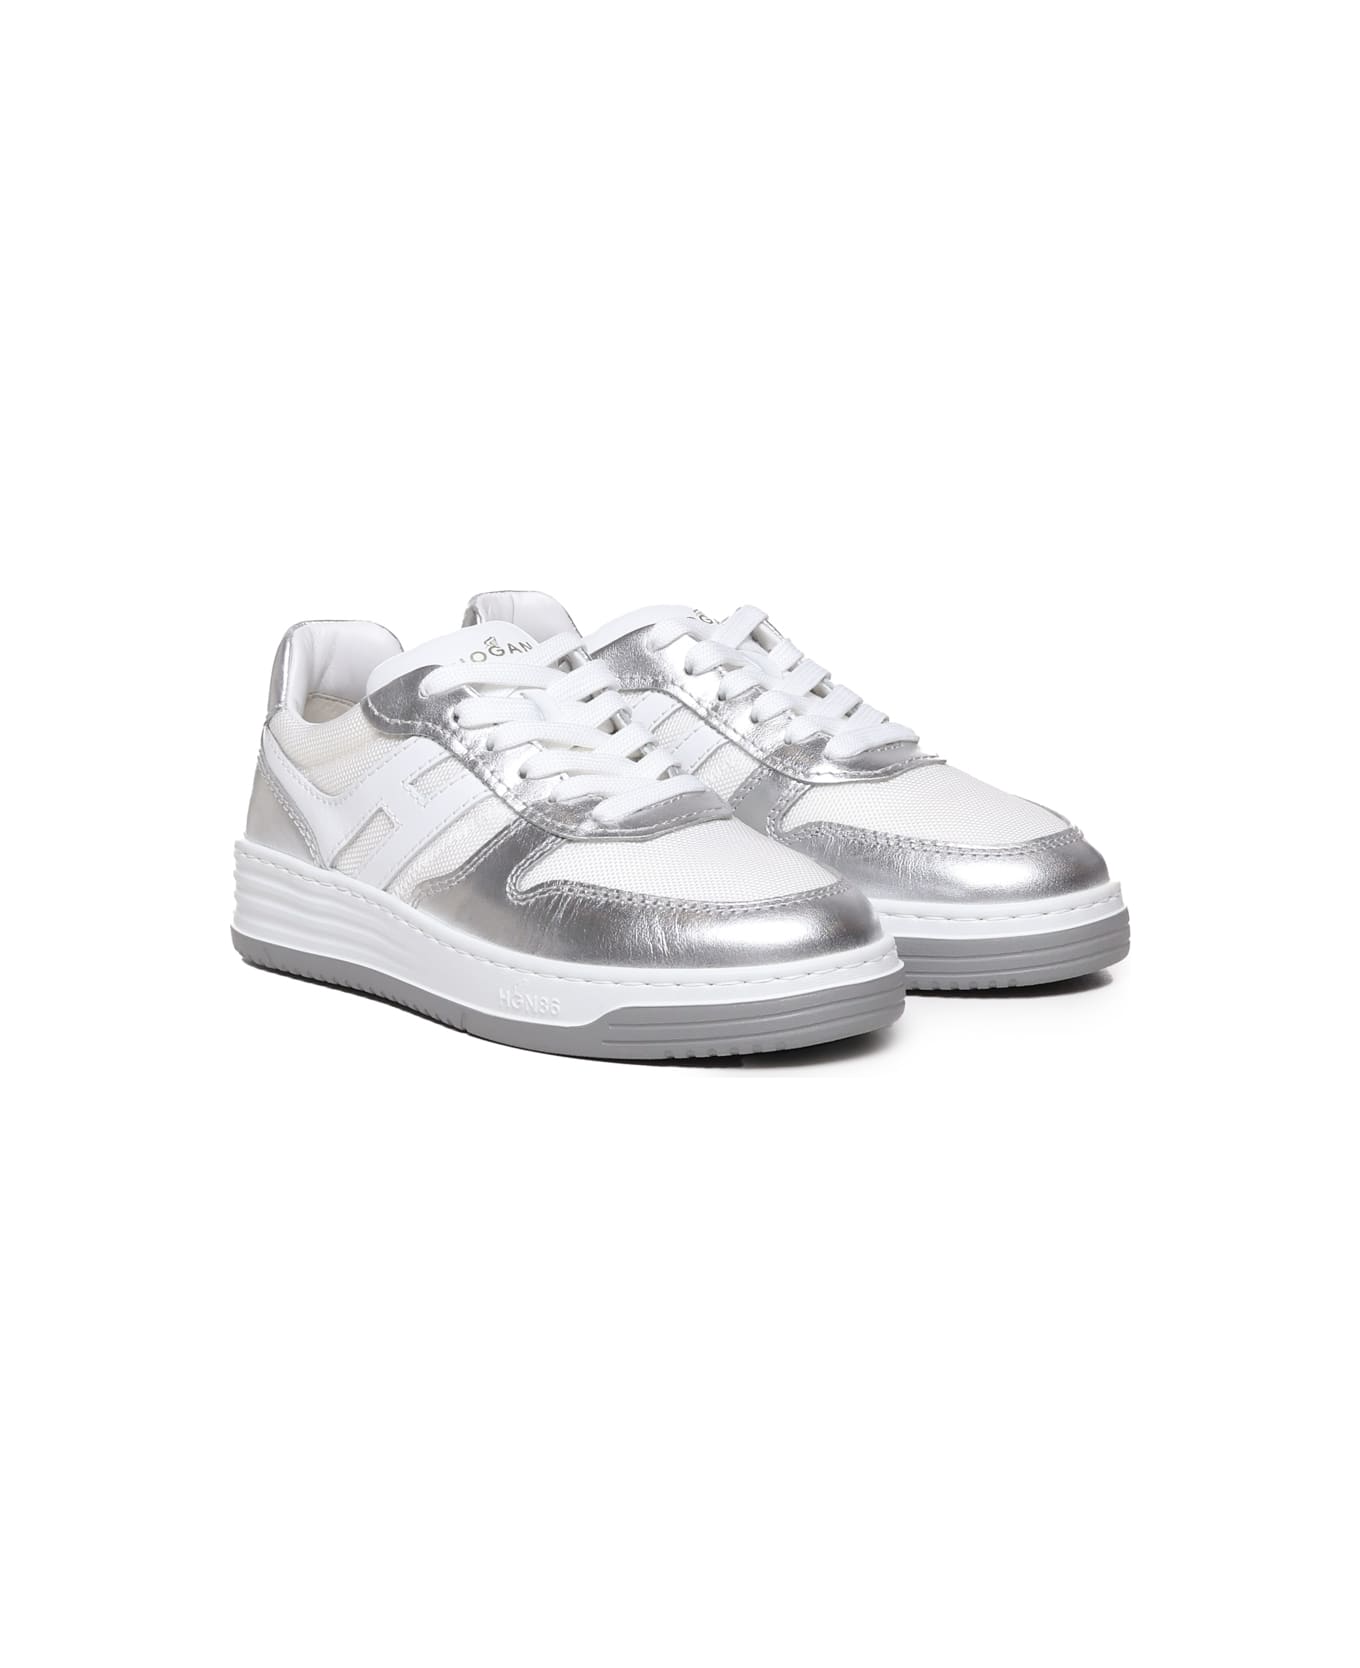 Hogan 630 Sneakers With Metallic Inserts - White, silver